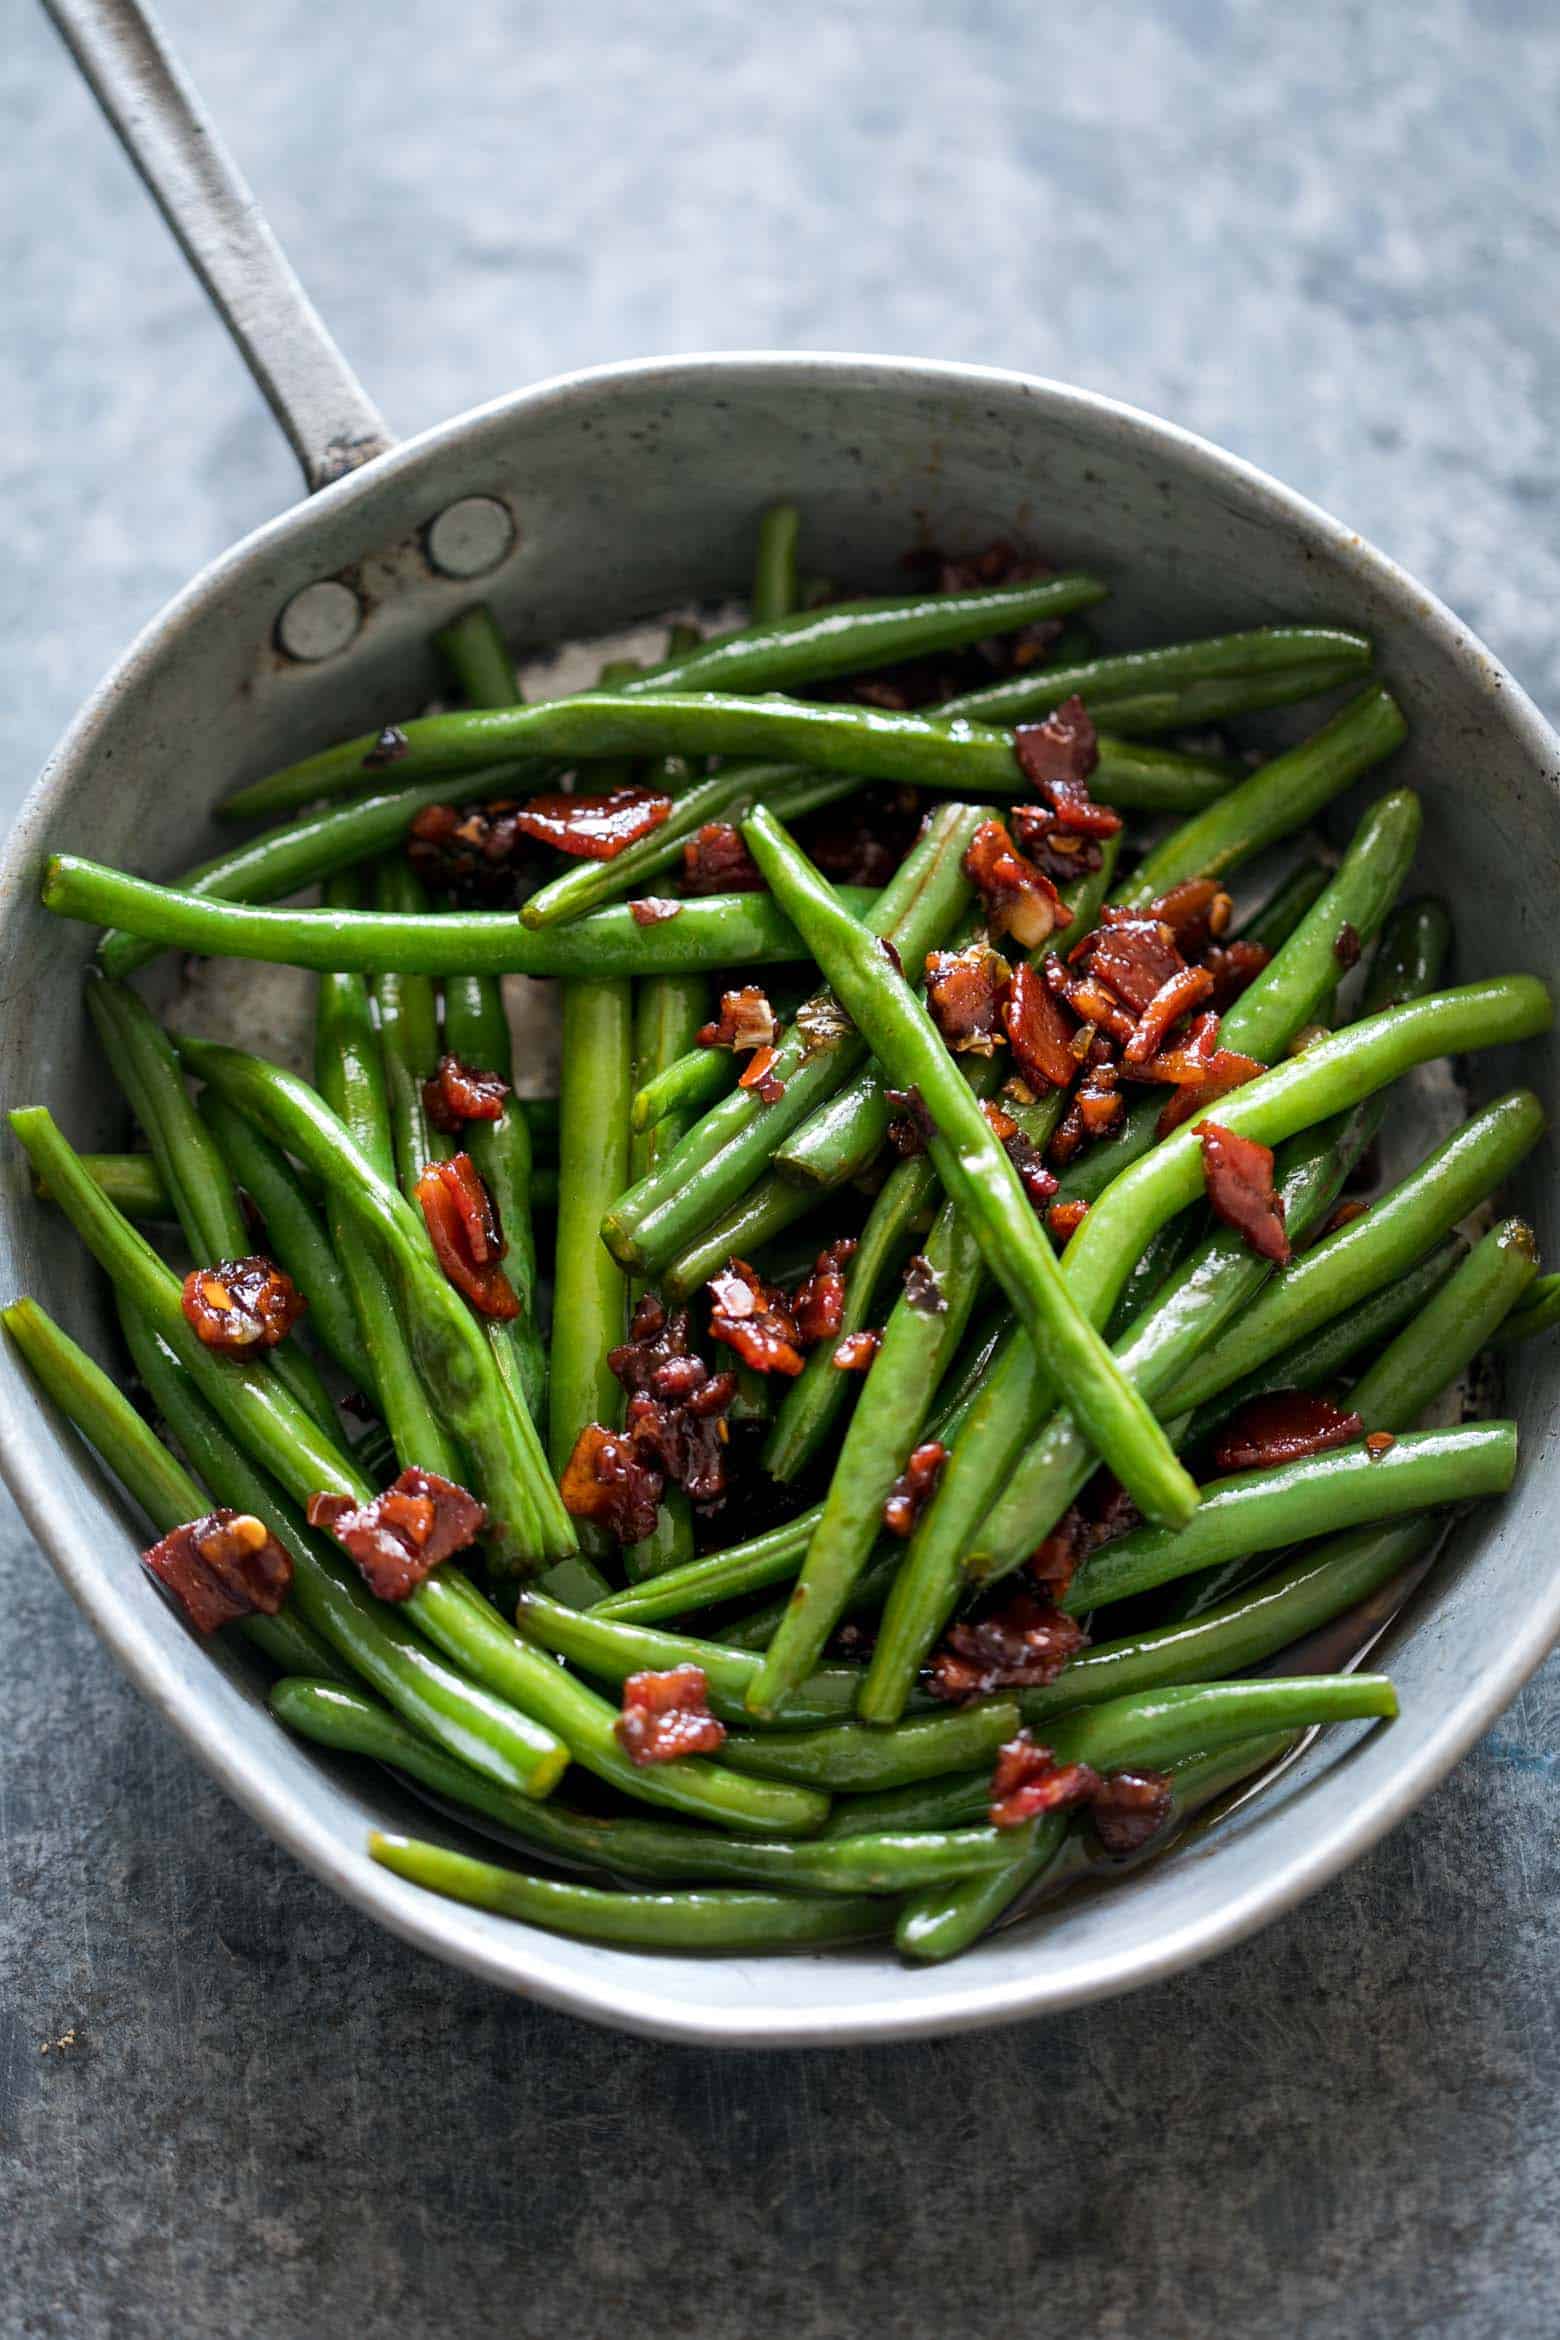 Sauteed Brown Sugar Bacon Garlic Green Beans is an insanely delicious side dish - sweet, garlicky with bits of candied bacon. Everyone will ask for seconds!